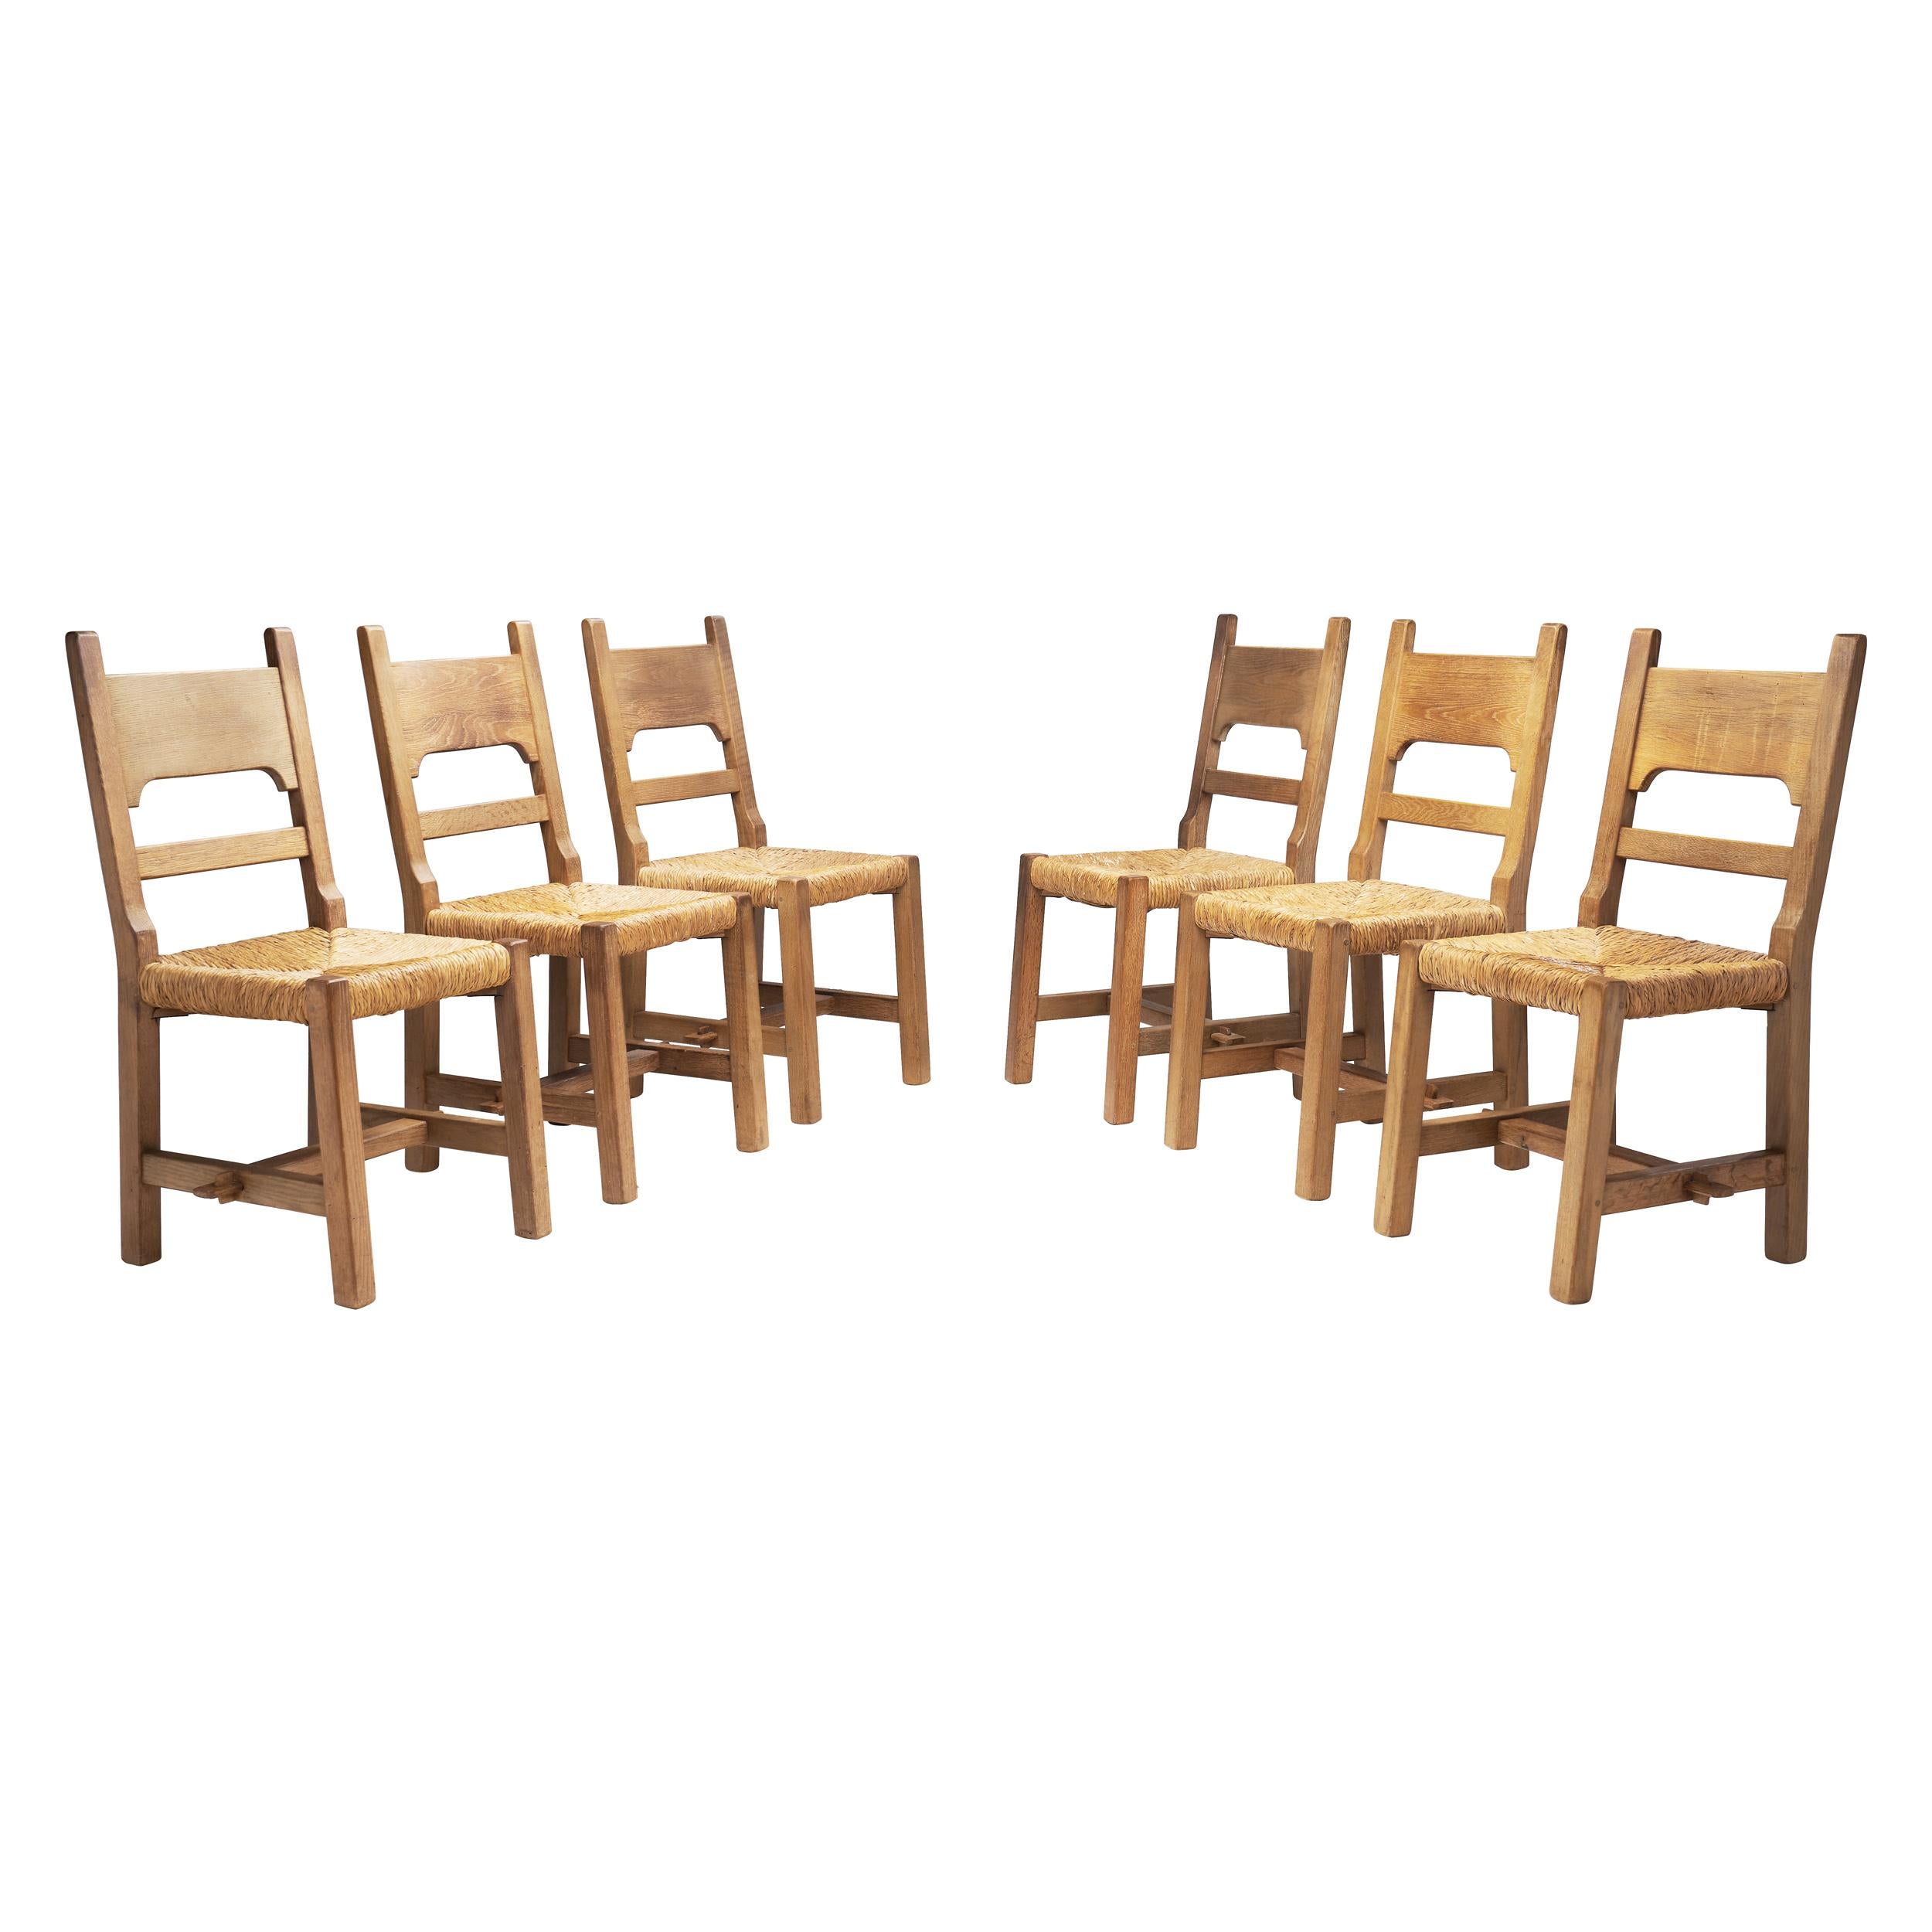 Six Brutalist Dining Chairs with Rush Seats, Europe ca 1960s